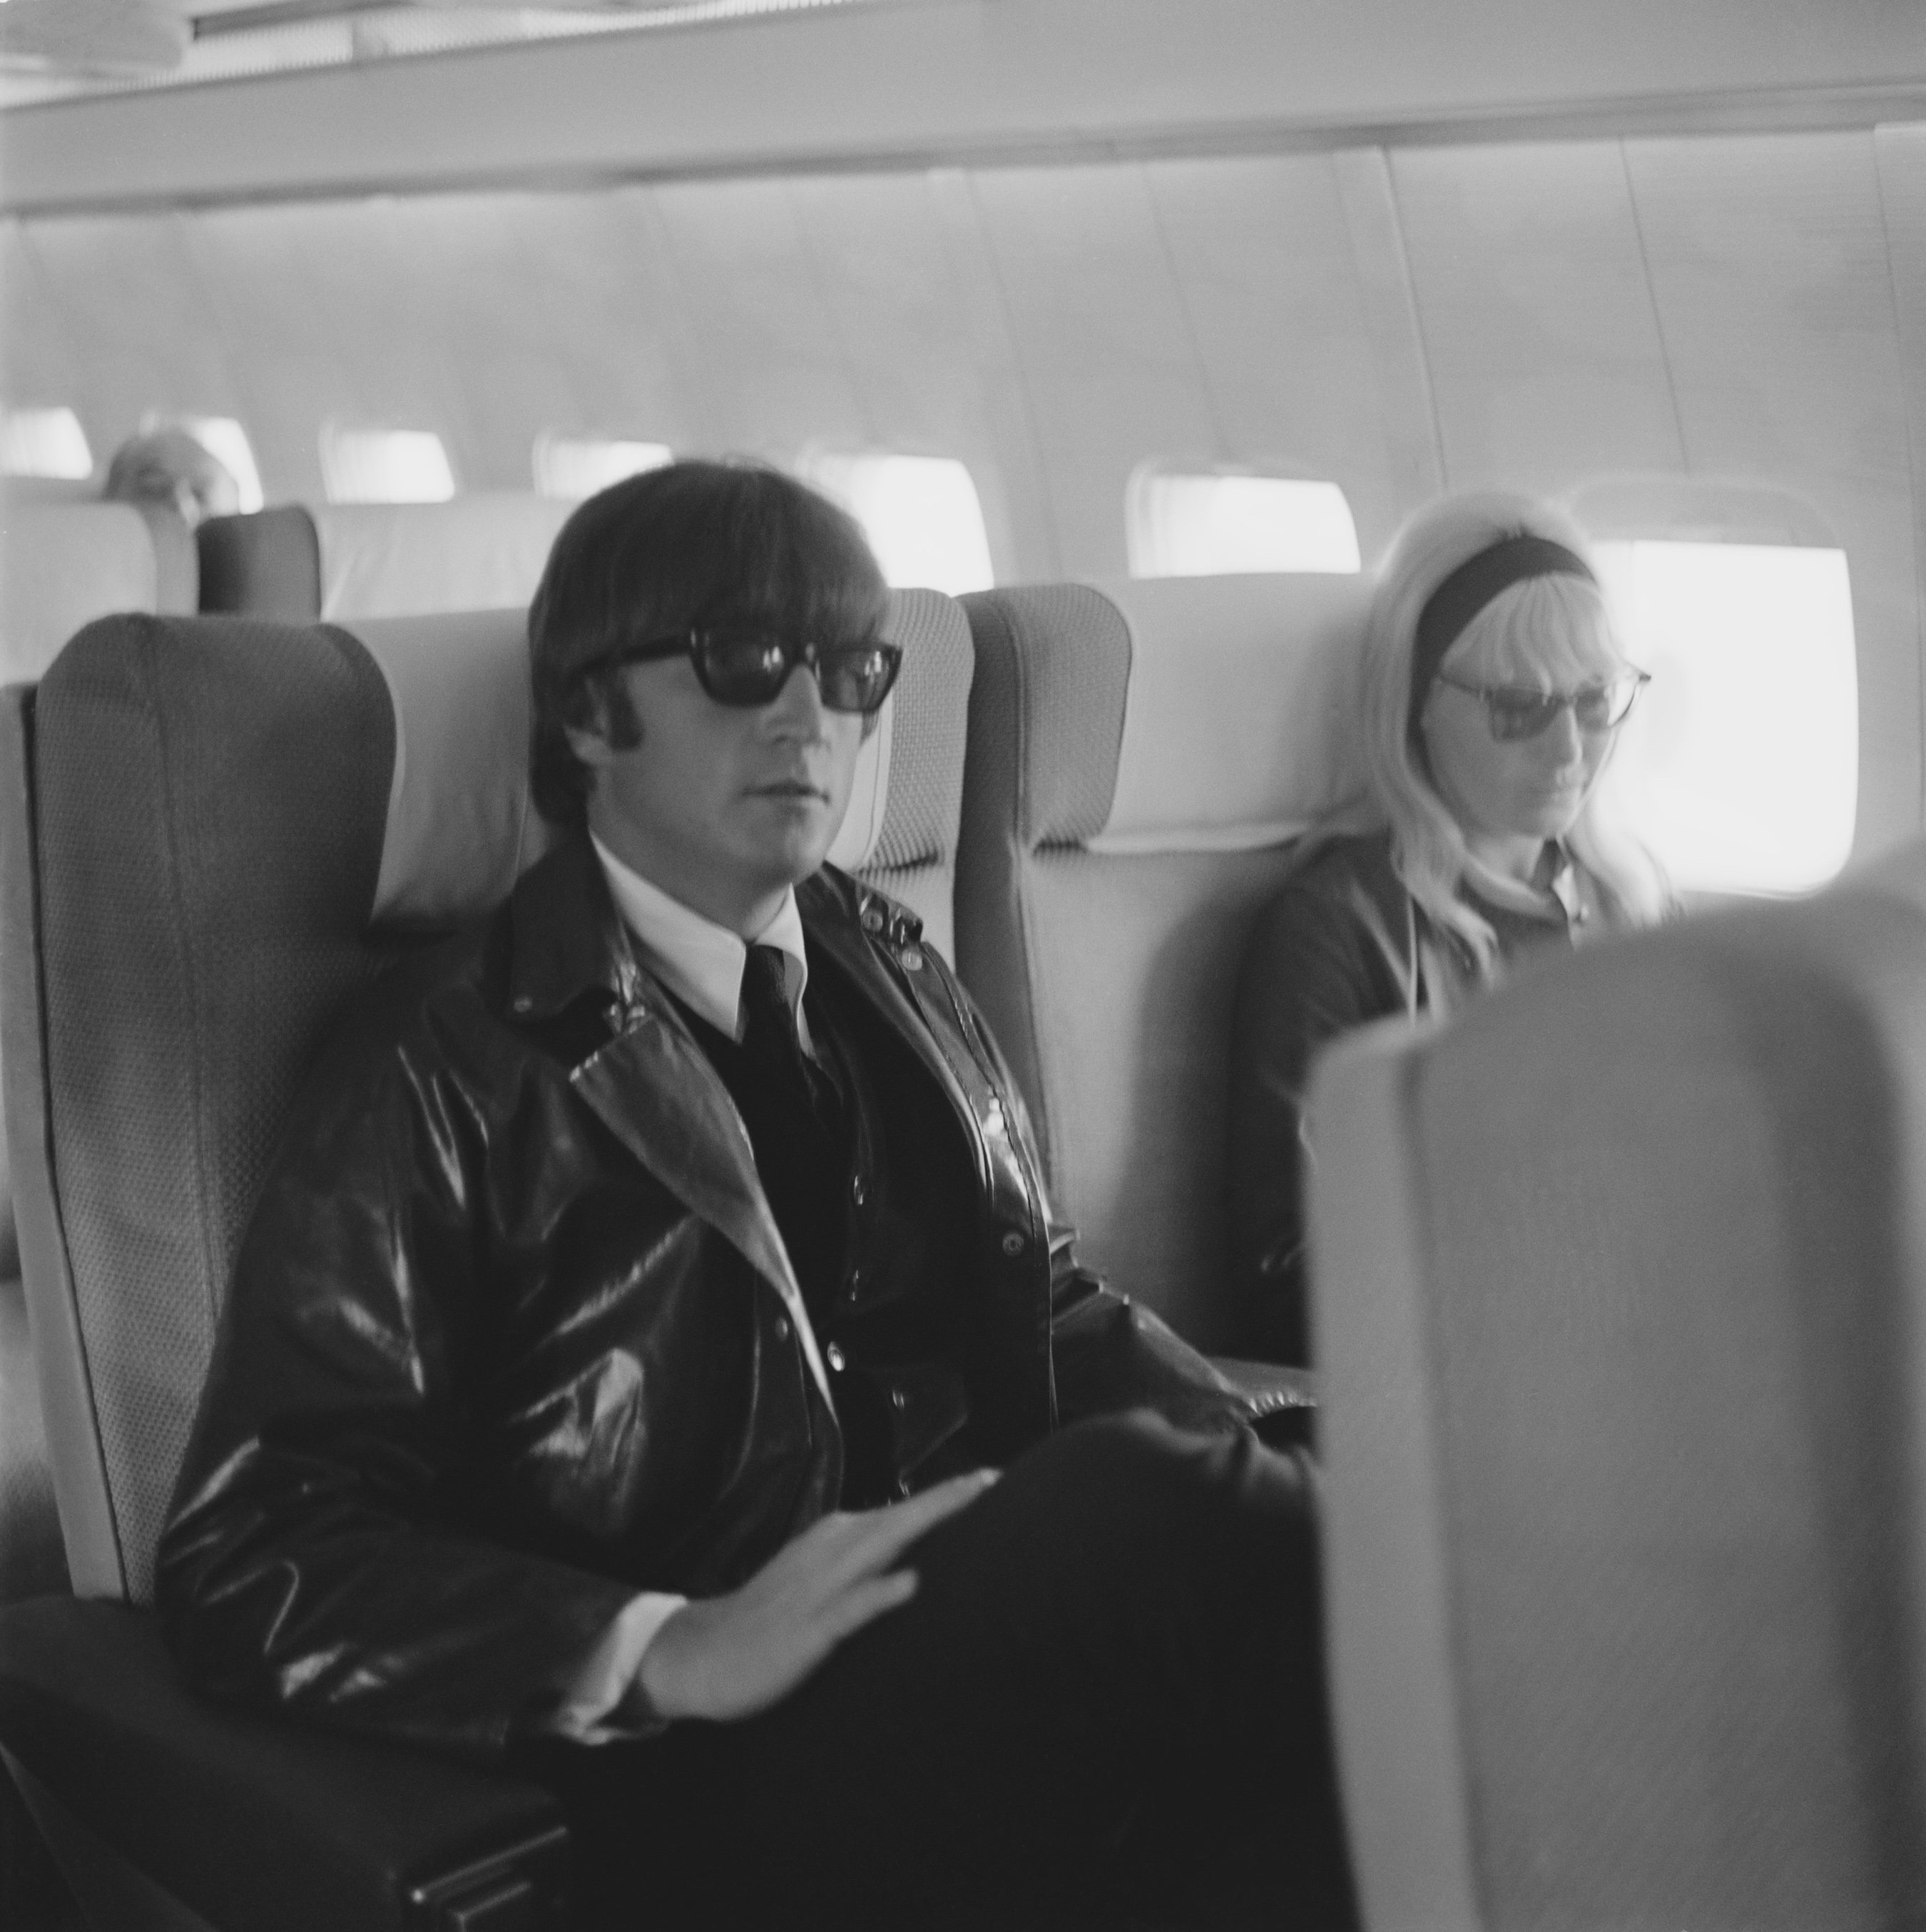 English singer, songwriter, and peace activist John Lennon (1940 - 1980) of the Beatles with his wife Cynthia (1939 - 2015) sitting on an airplane